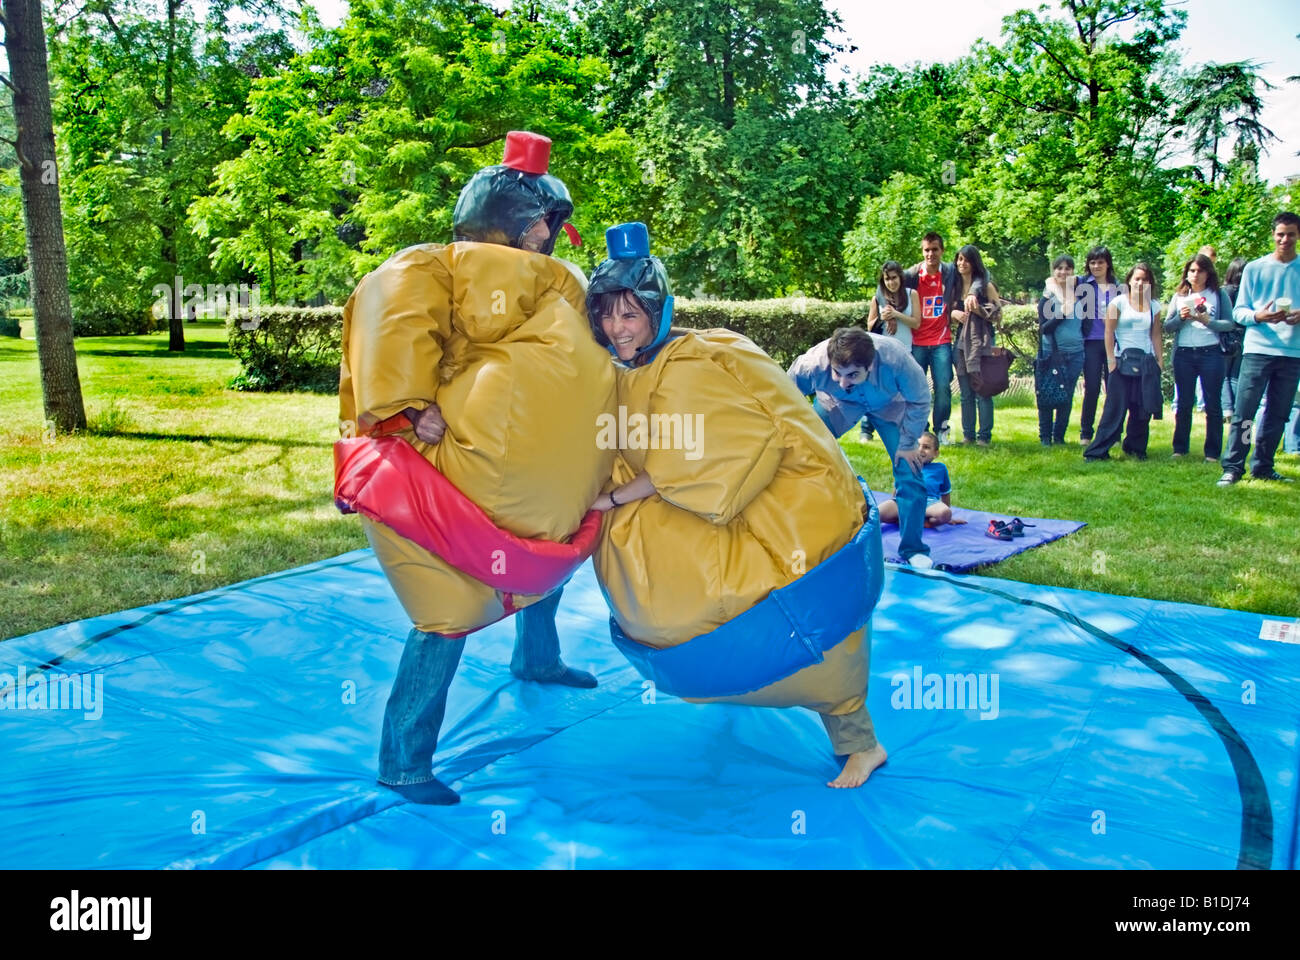 Paris France, Group Young People Watching Two Teens 'Sumo Wrestlers' in Costume Fighting Outside in 'Parc de Vincennes' Stock Photo